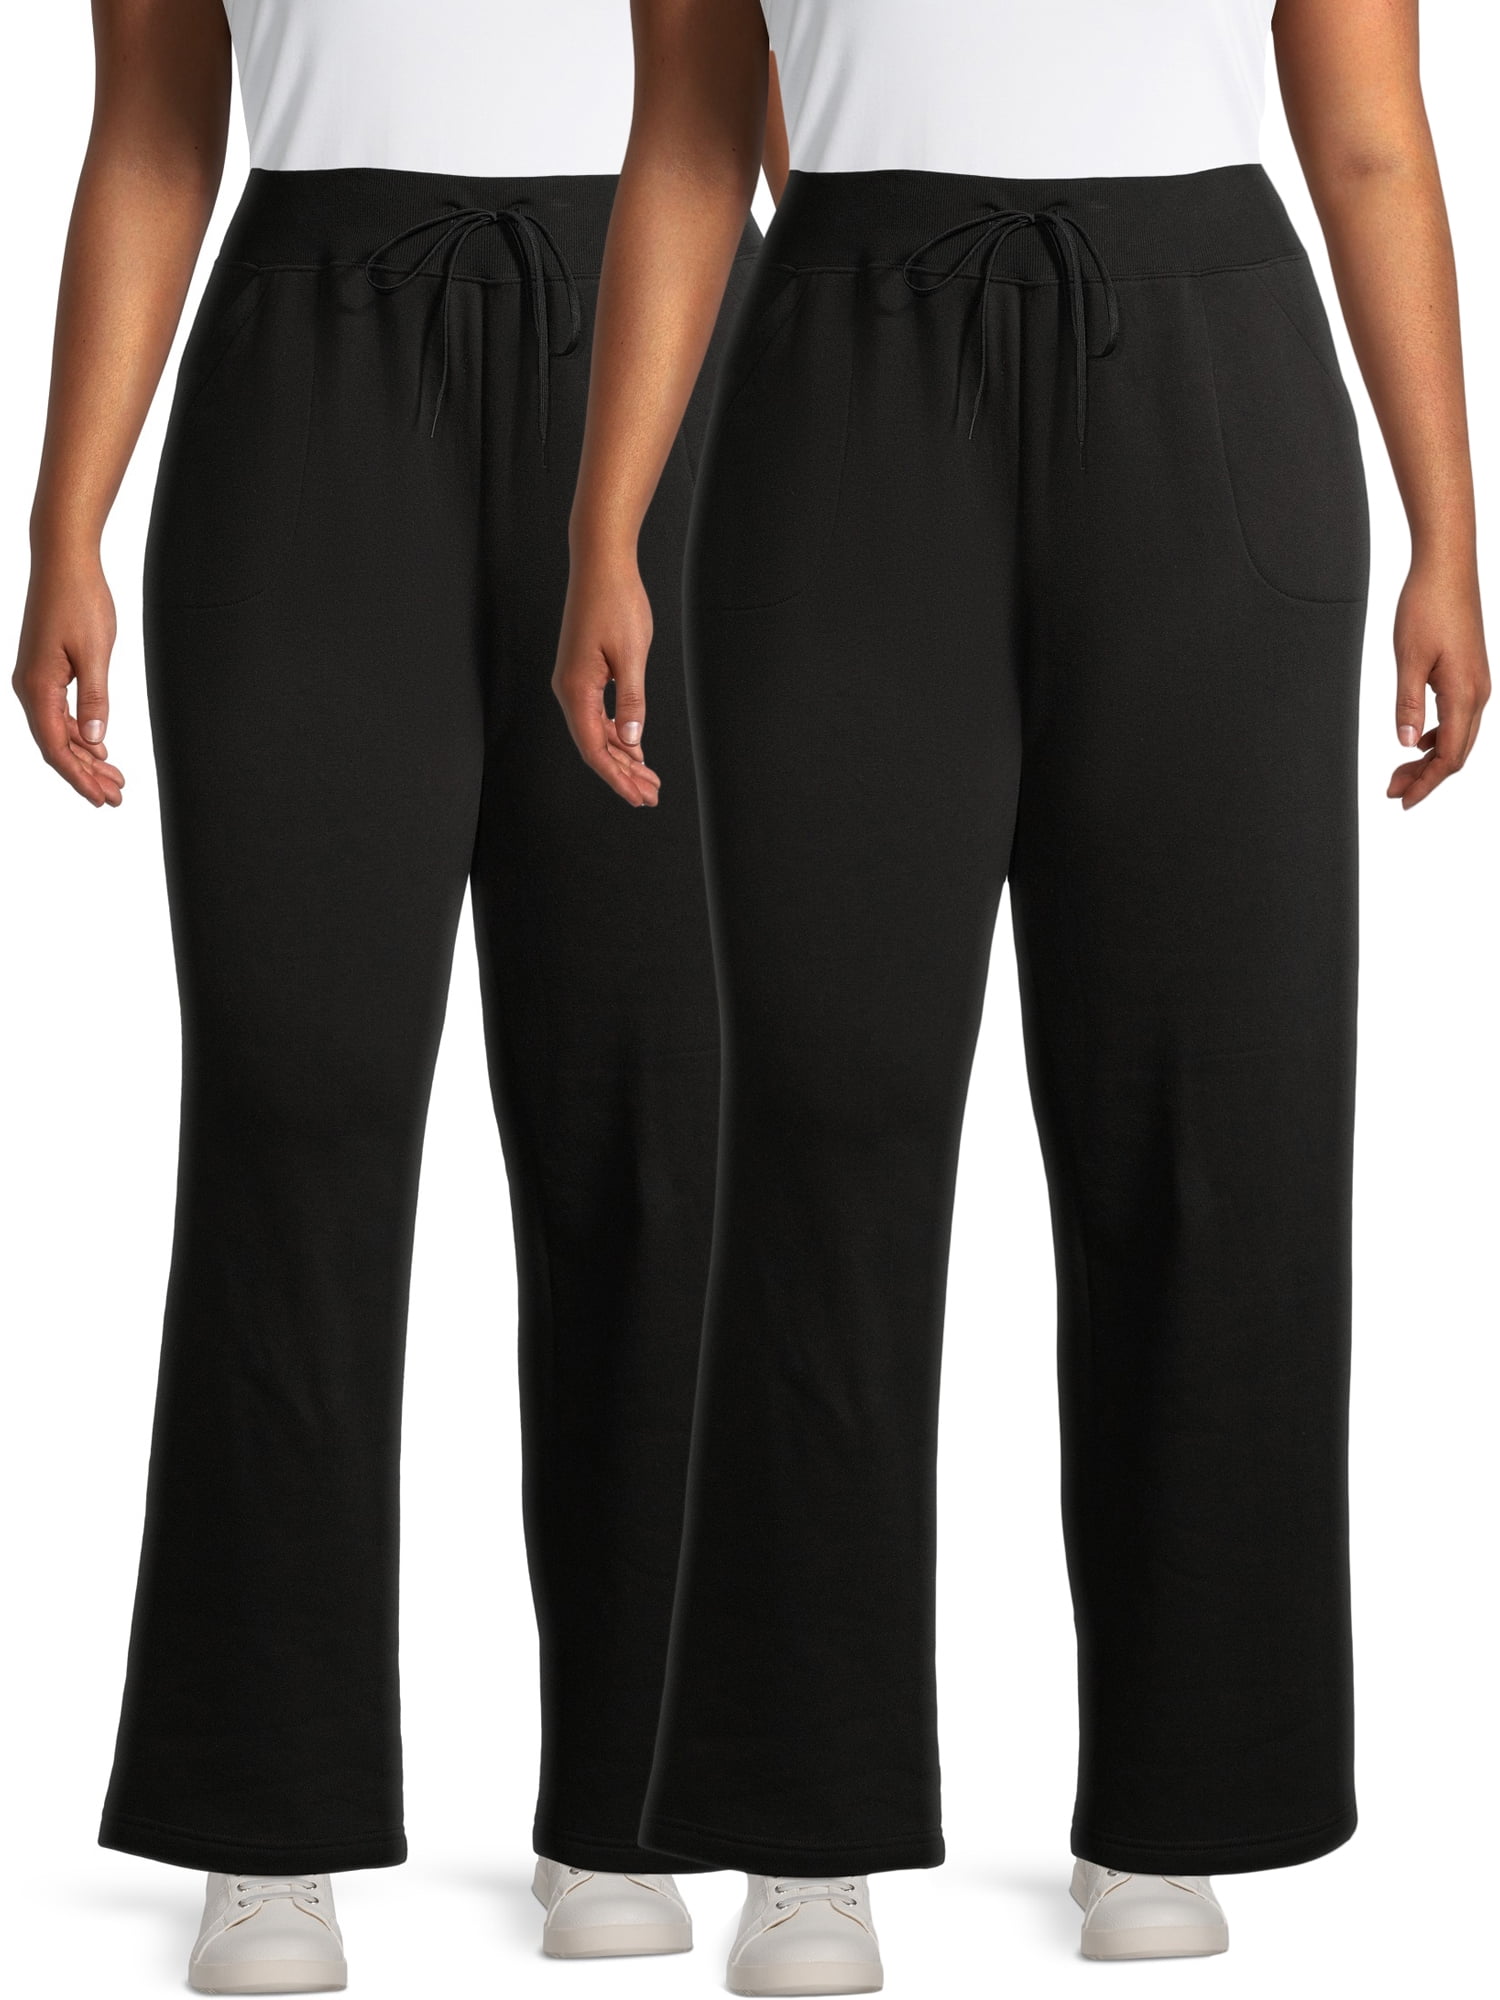 Athletic Works Women's Plus Size Fleece Relaxed Fit Pants, 2-Pack Bundle 